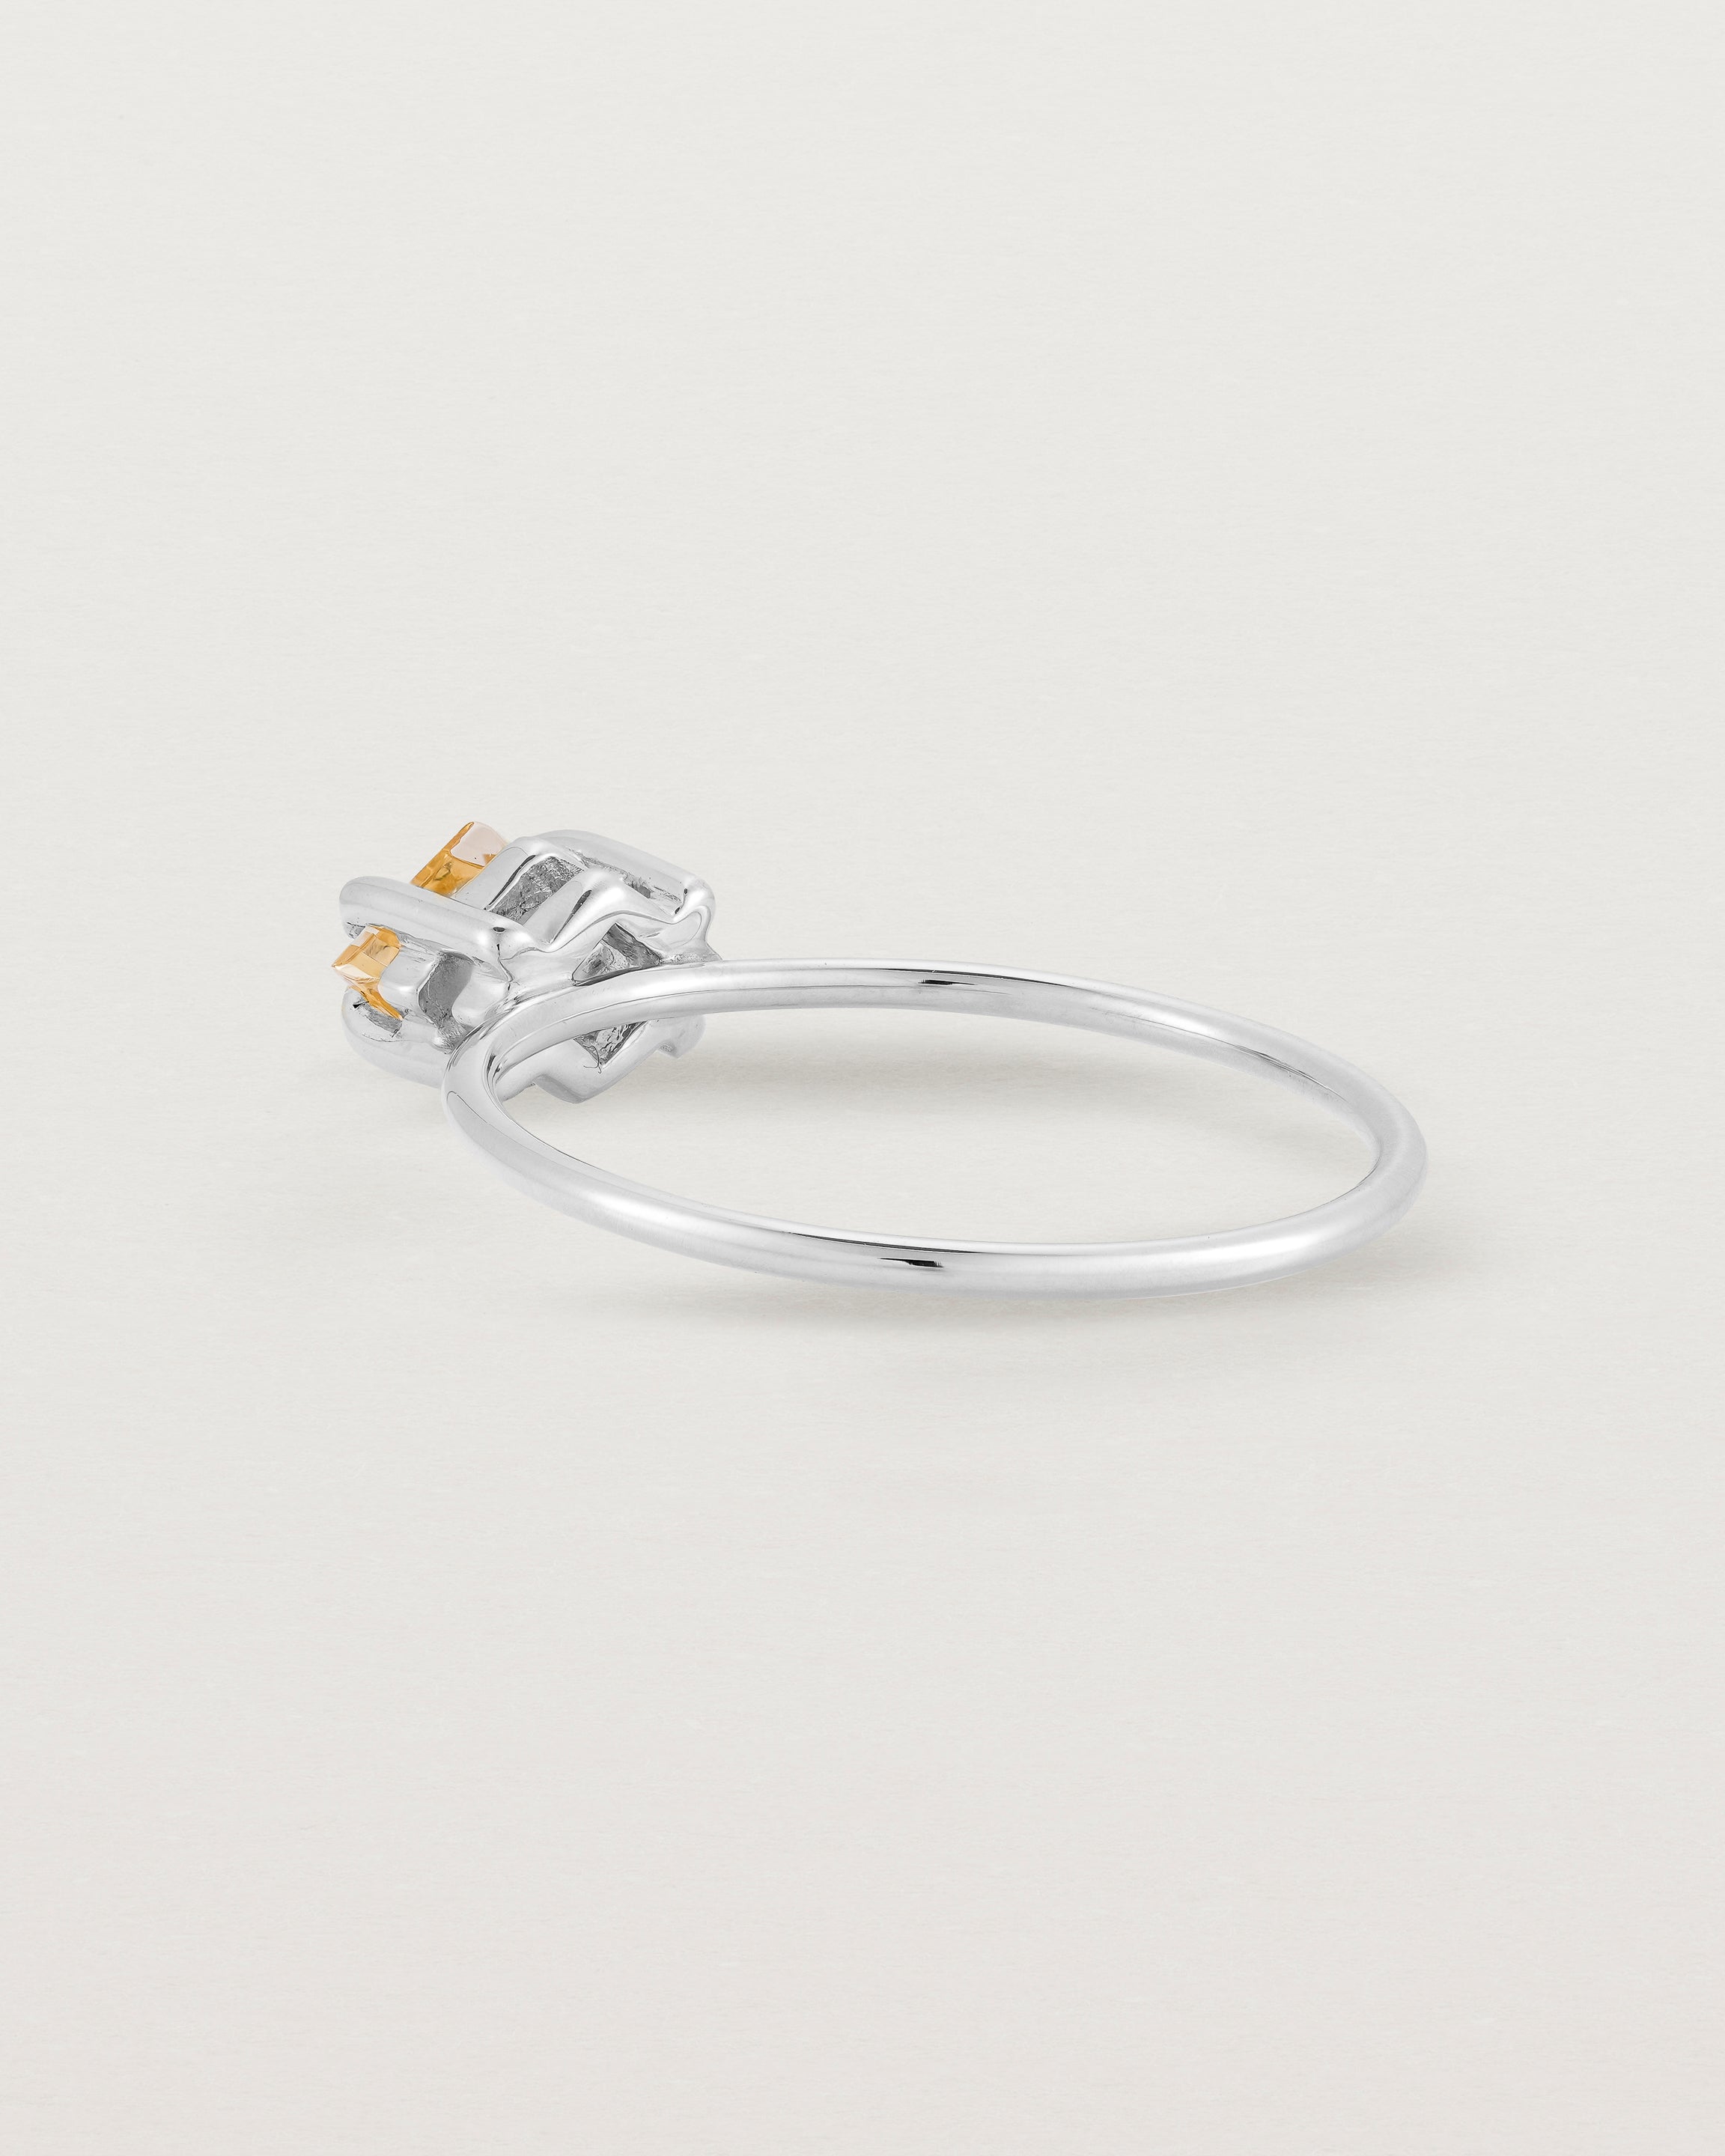 Back view of the Mai Ring | Savannah Sunstone in Sterling Silver.